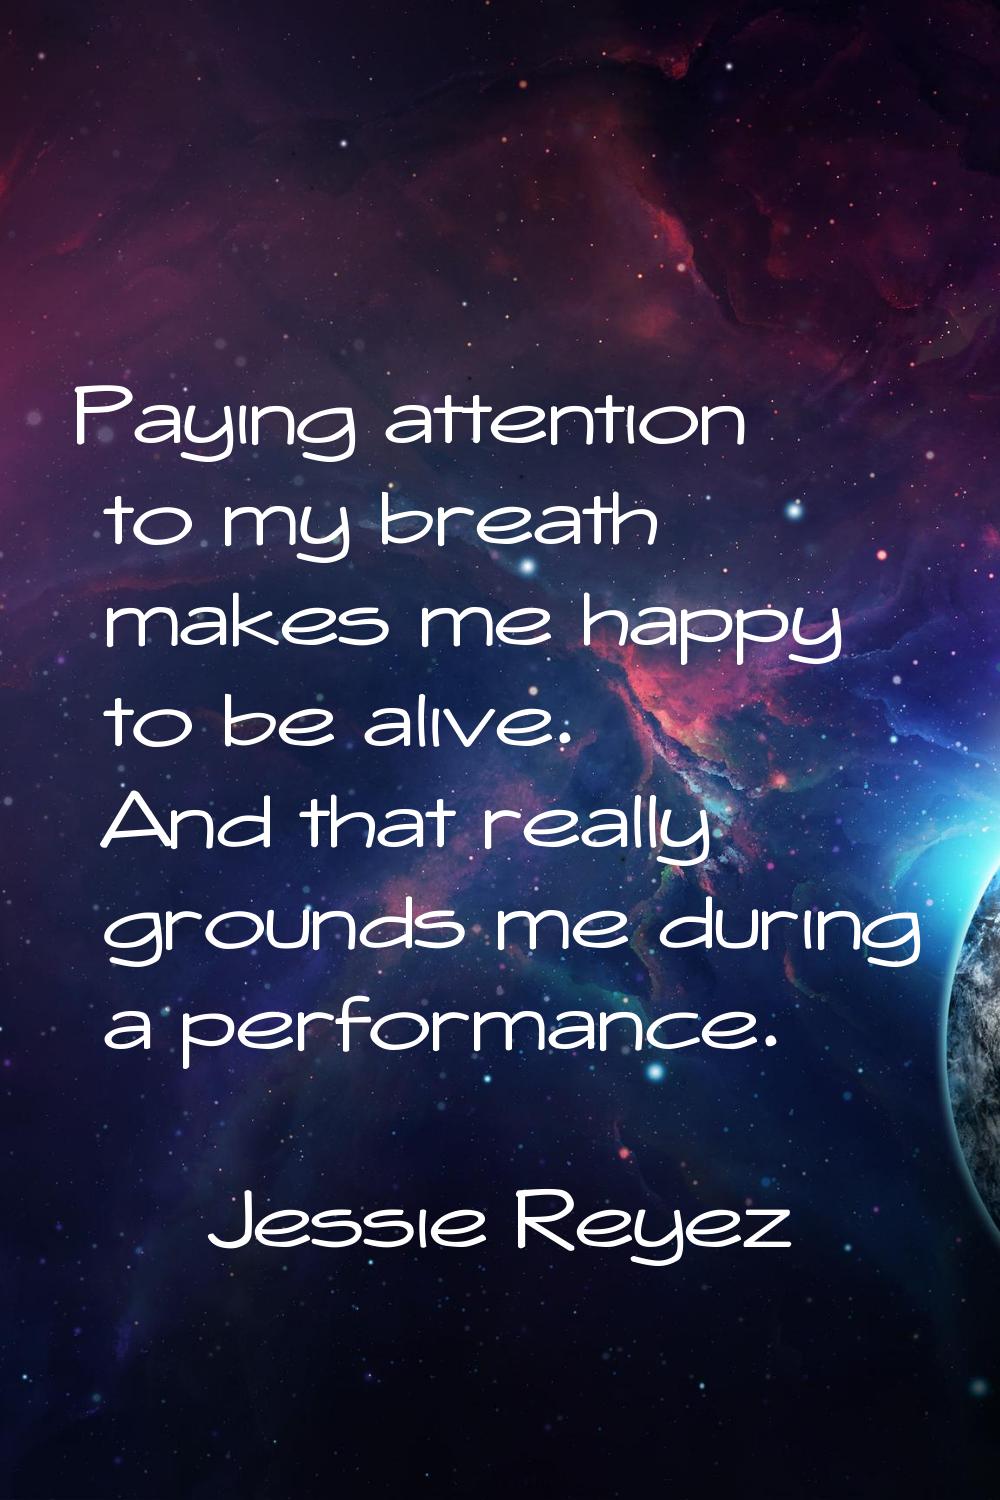 Paying attention to my breath makes me happy to be alive. And that really grounds me during a perfo